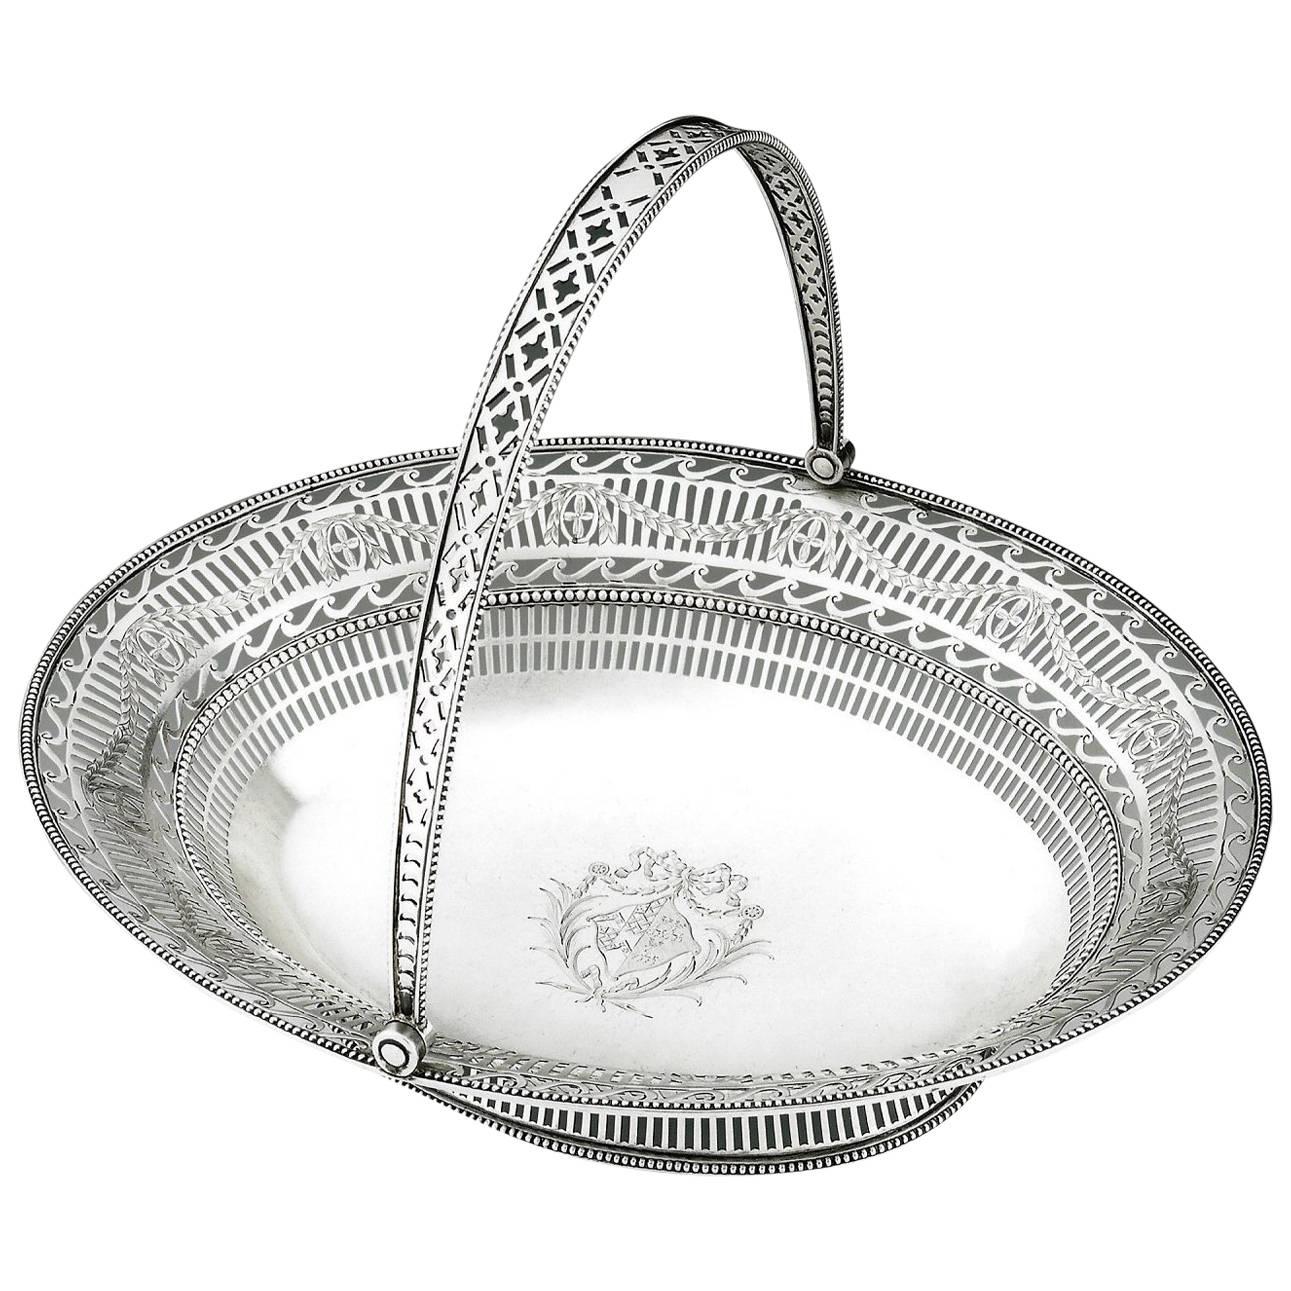 A George III Neo Classical Bread Basket made by Richard Morton, Sheffield, 1777 